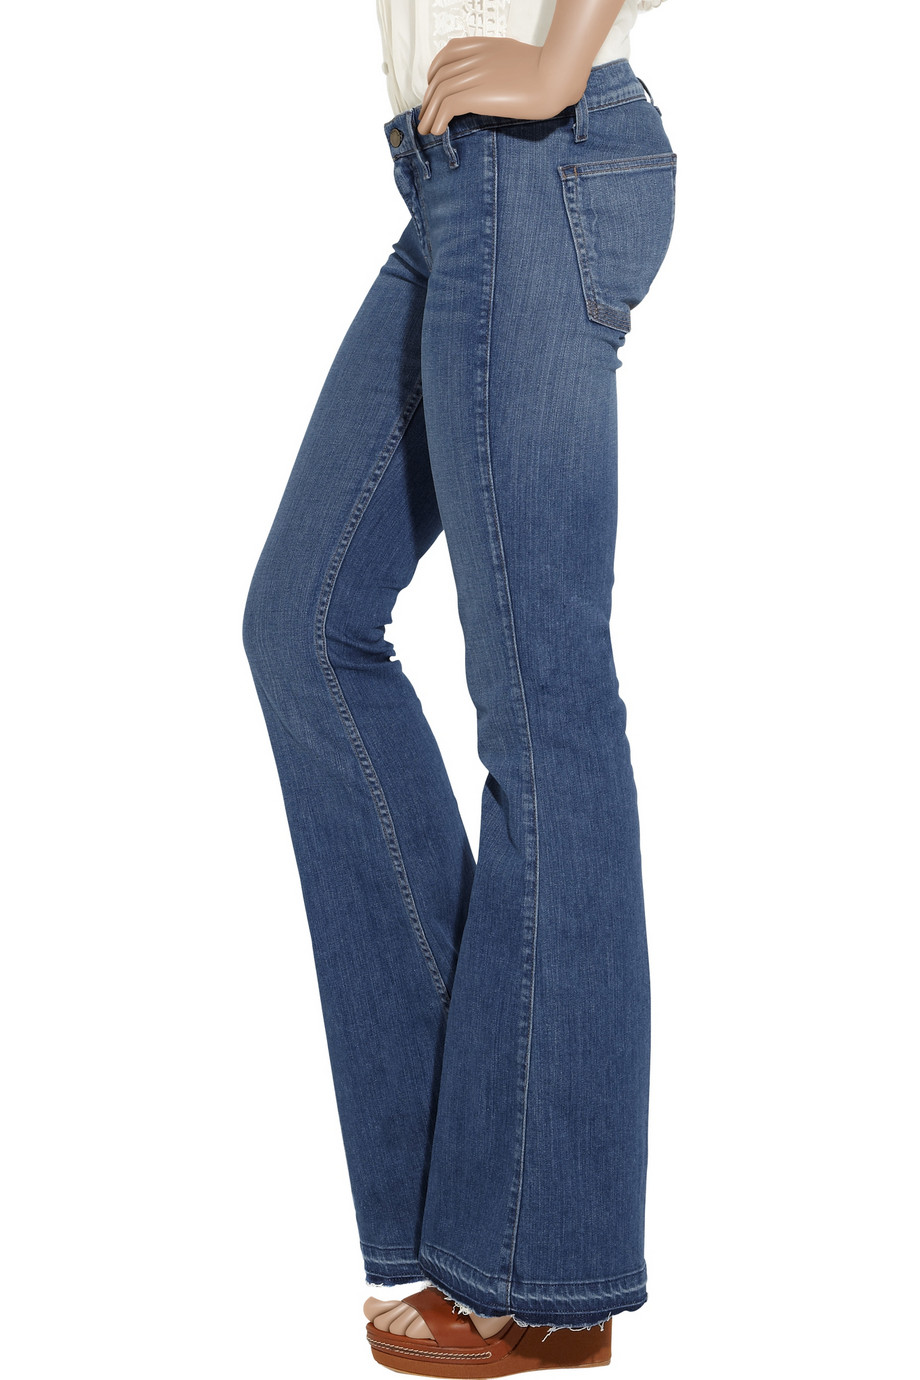 Lyst - Textile Elizabeth And James Jimi Mid-rise Flared Jeans in Blue